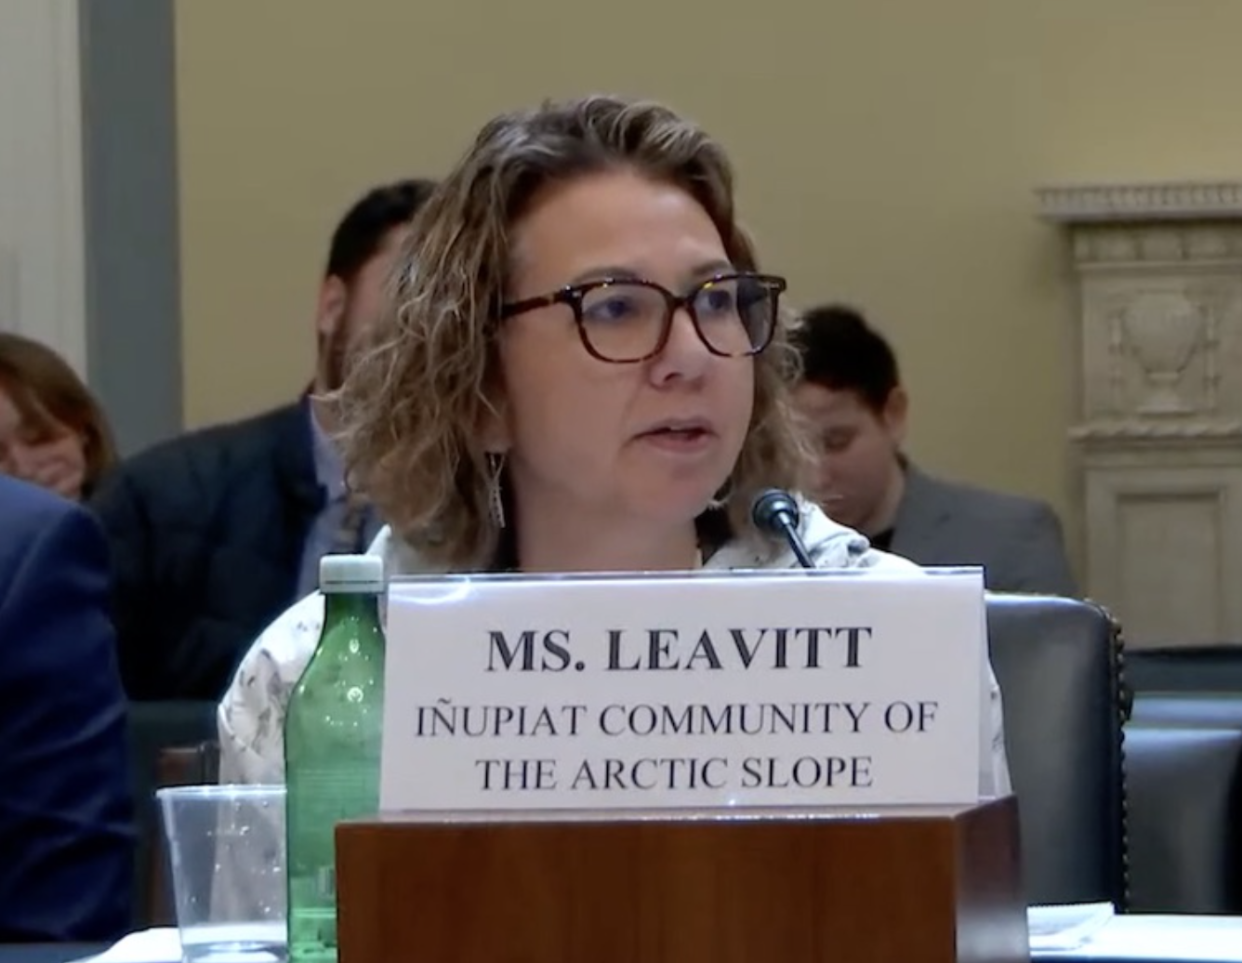  Doreen Leavitt of the Inupiat Community of the Arctic Slope told House members during the Nov. 29 hearing. (Photo/Hearing Screenshot))